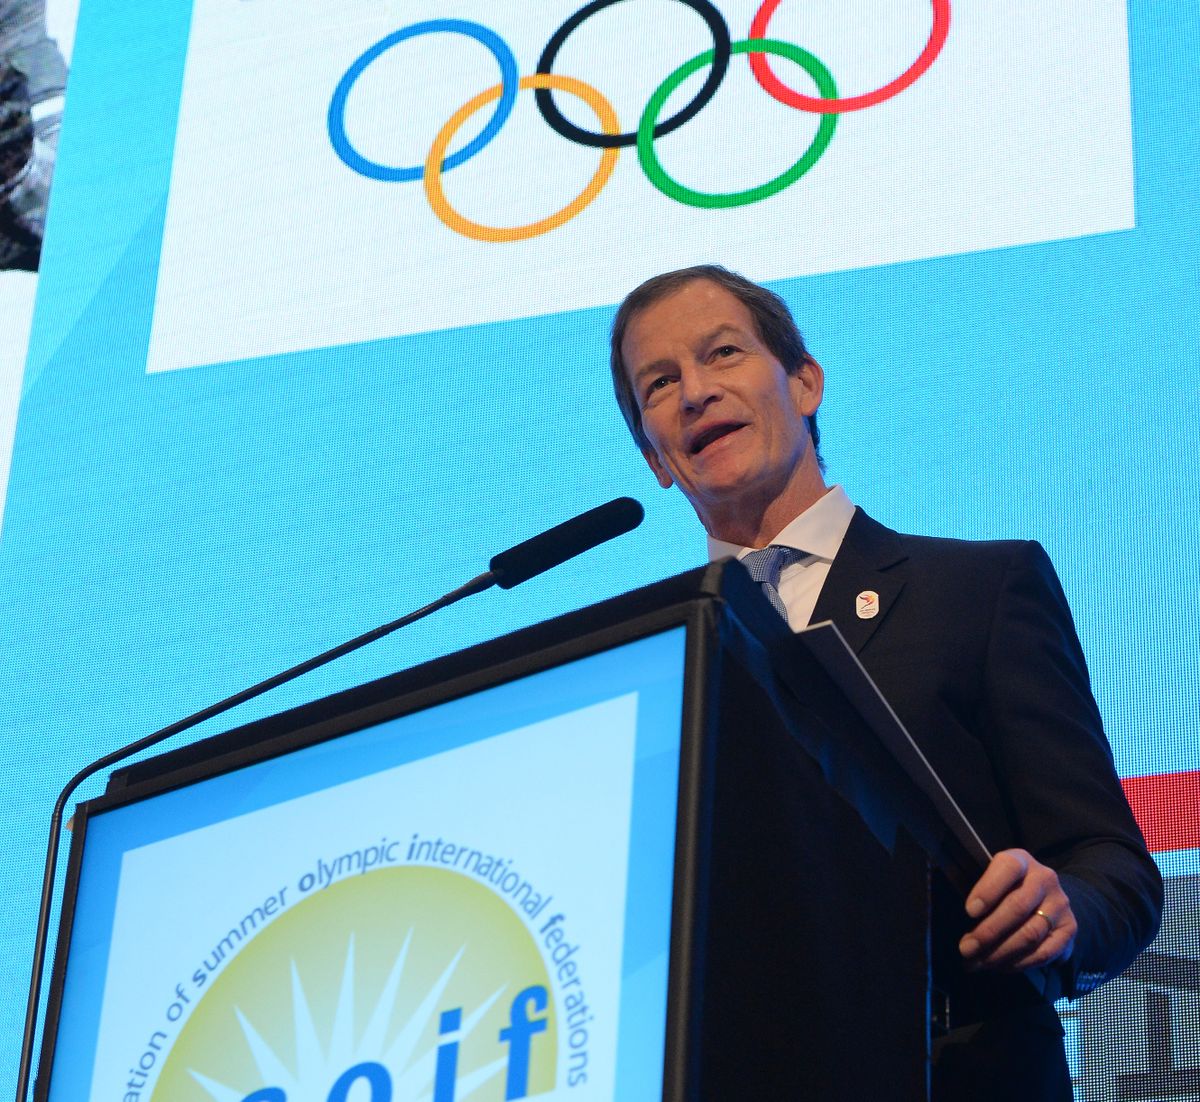 AARHUS, DENMARK - APRIL 04: CEO of the Los Angles 2024 Summer Olympic bid Gene Sykes speaks during a presentation at the ASOIF general Assembly during the third day of SportAccord Convention 2017 at the Scandinavian Centre on April 4, 2017 in Aarhus, Denmark. 